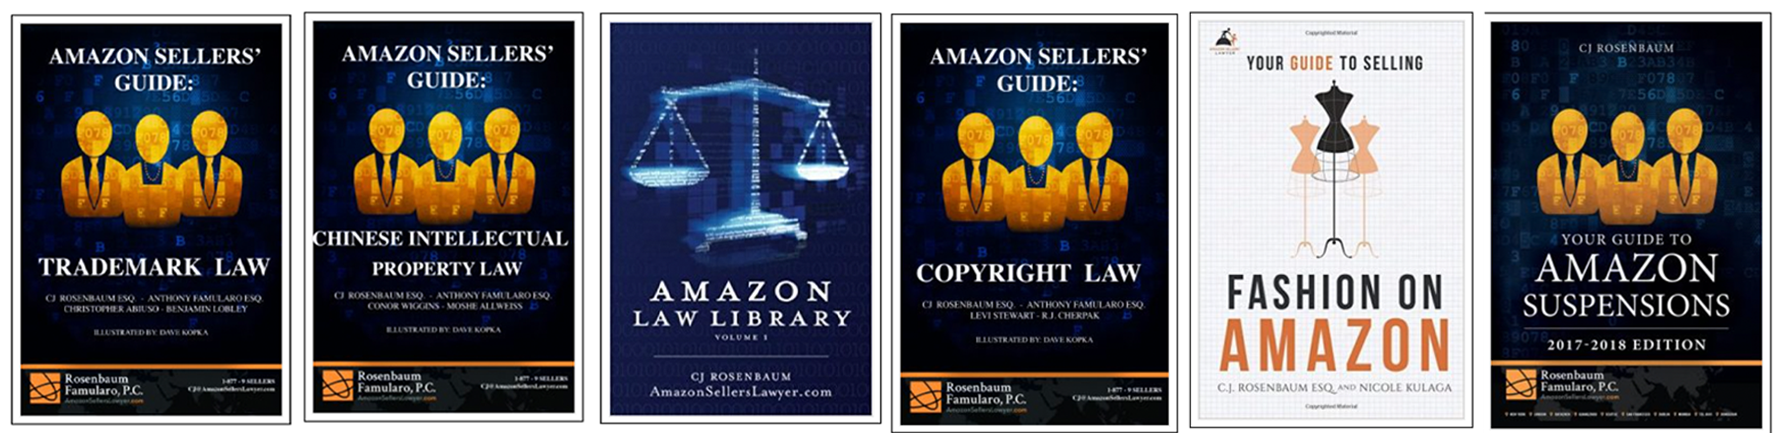 BOOKS for AMZ sellers